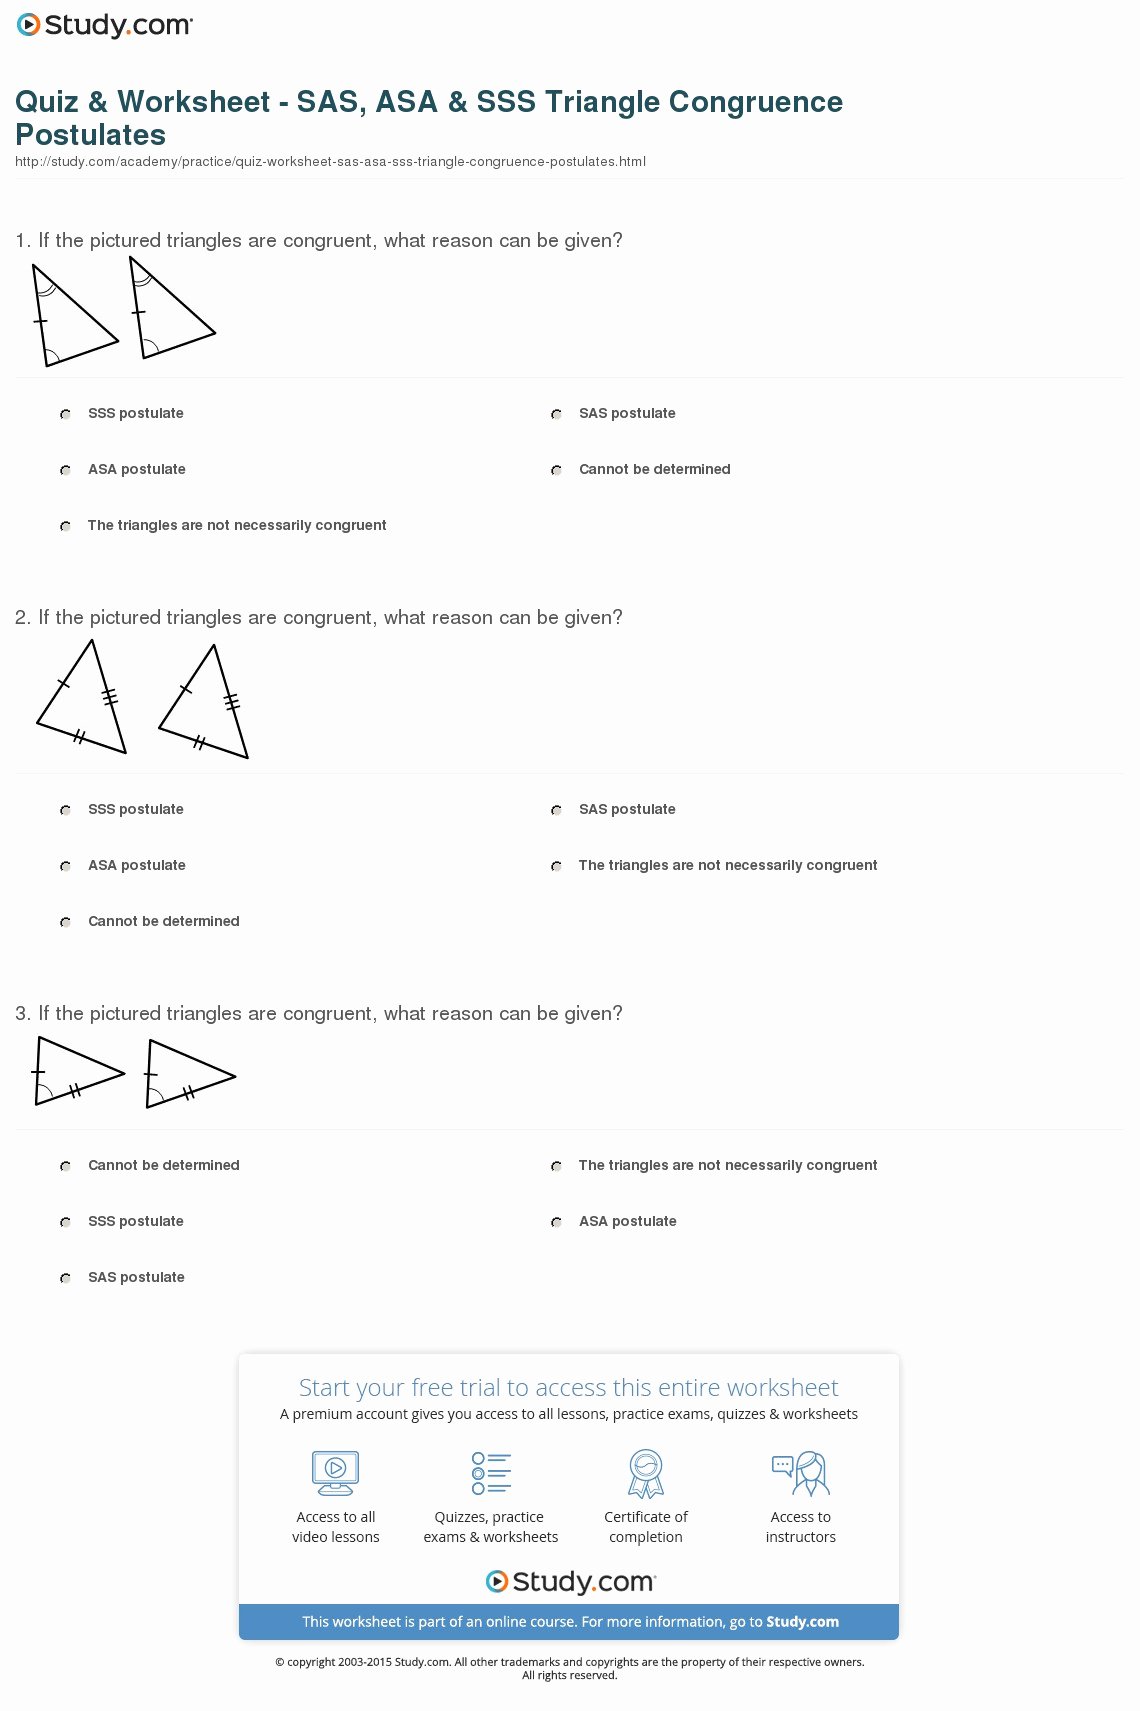 Congruent Triangles Worksheet with Answer Awesome Quiz &amp; Worksheet Sas asa &amp; Sss Triangle Congruence